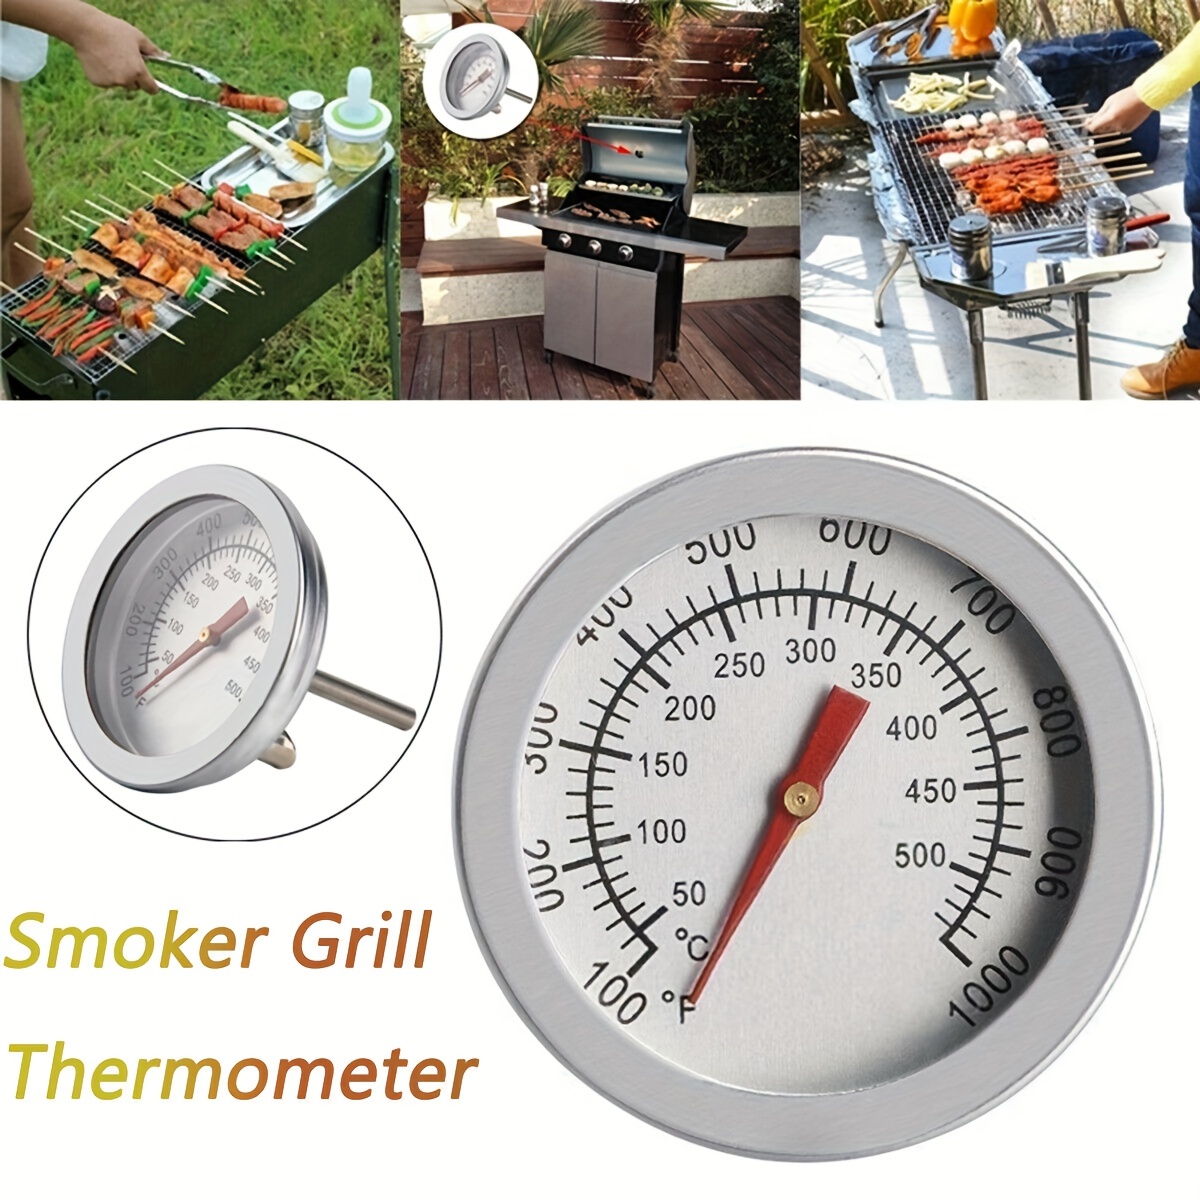 BBQ Grill Smoker Temperature Gauges Pit Barbecue Thermometer for